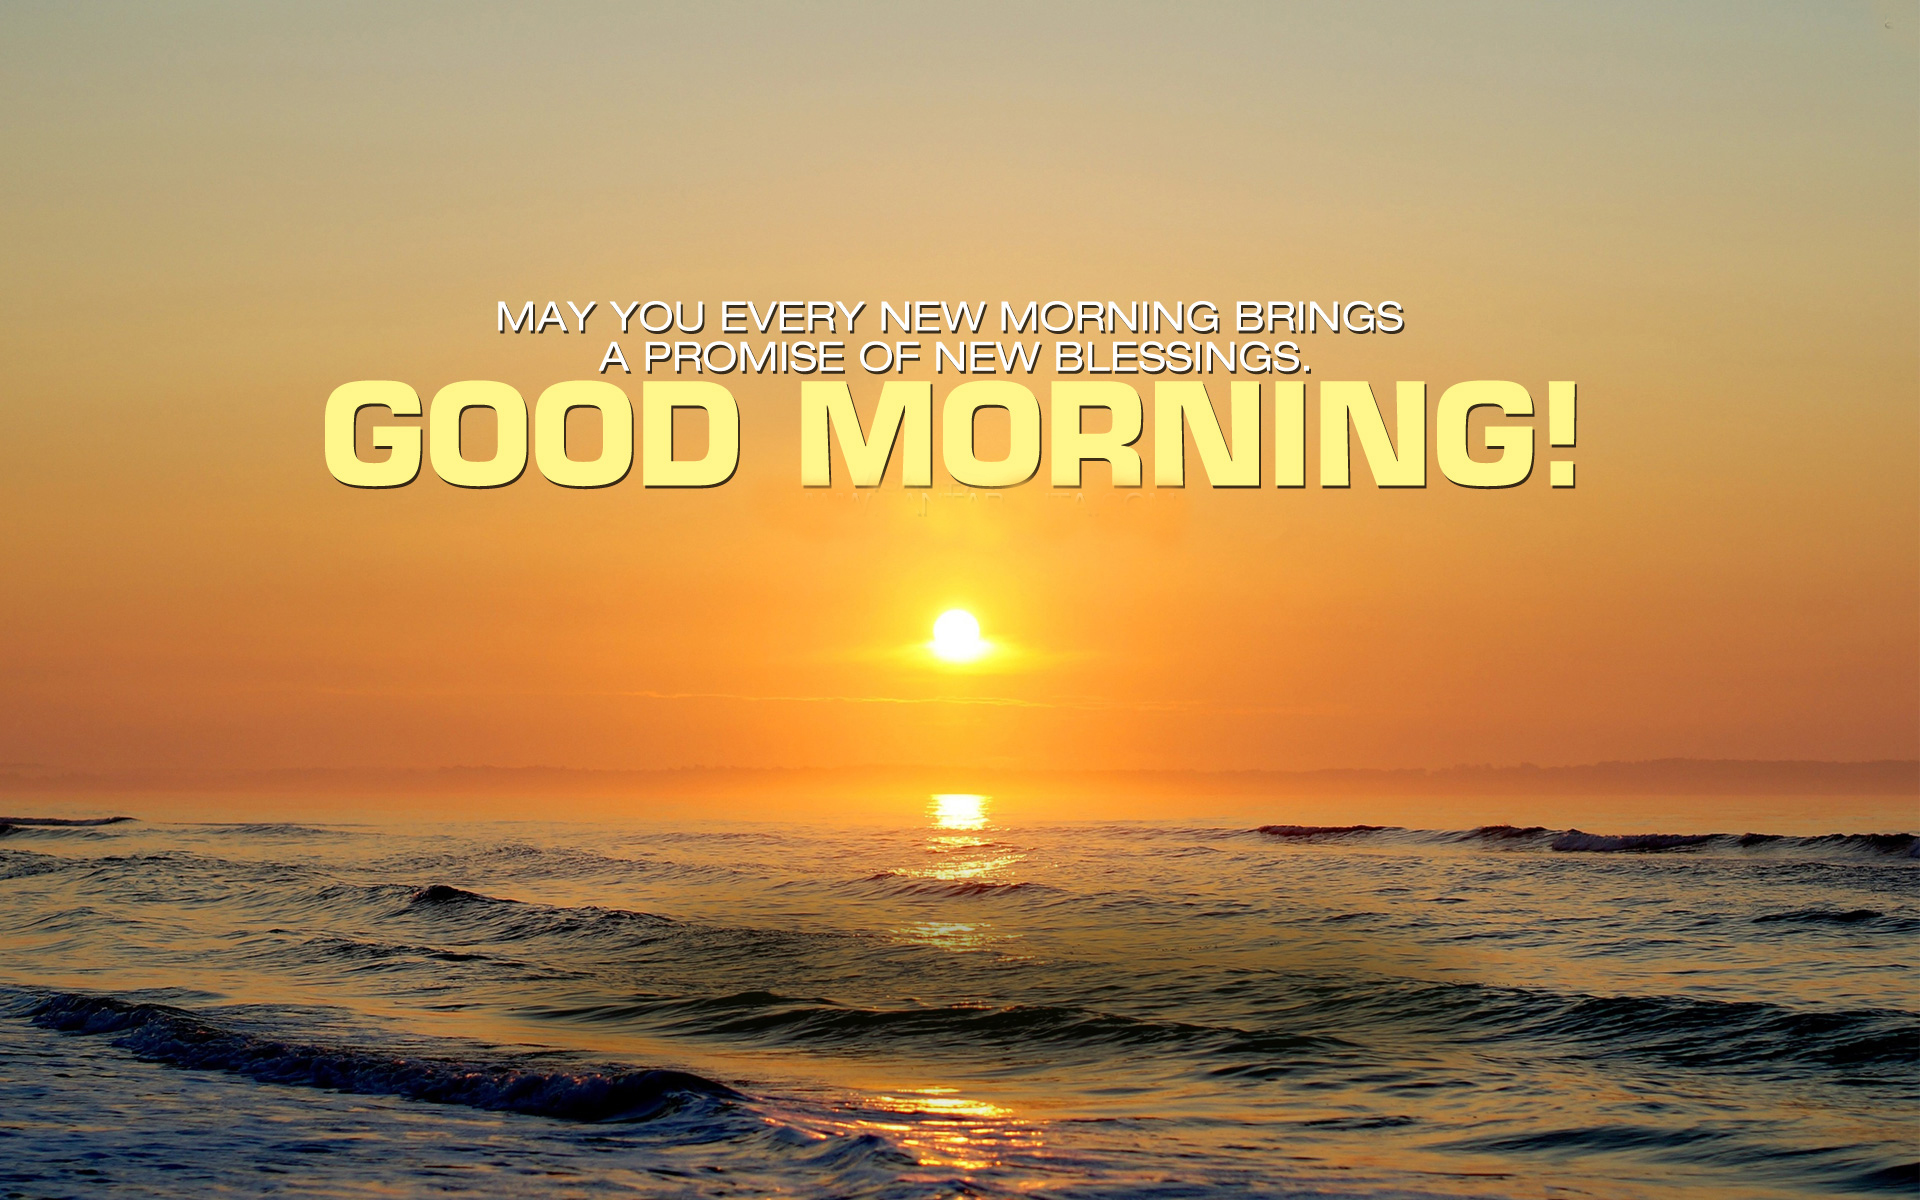 Free Download Good Morning Wishes Hd Wallpaper Download Hd Wallpapers 1920x1200 For Your